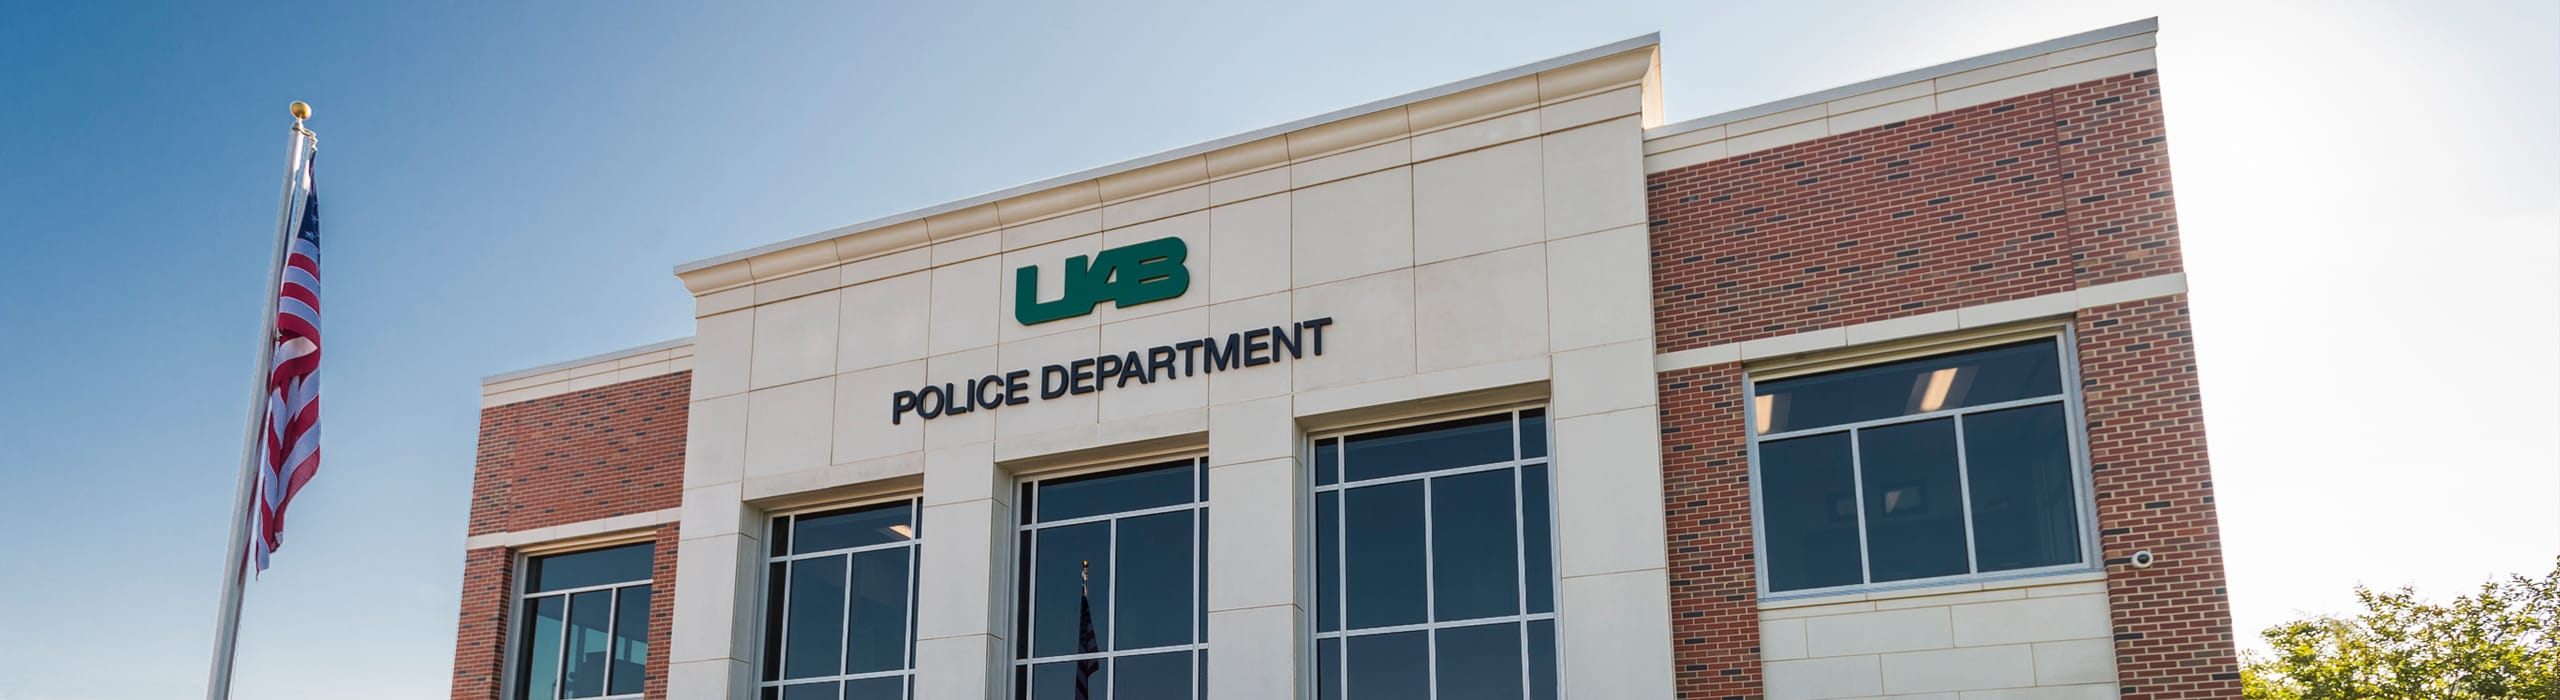 Picture of UAB Police headquarters building.